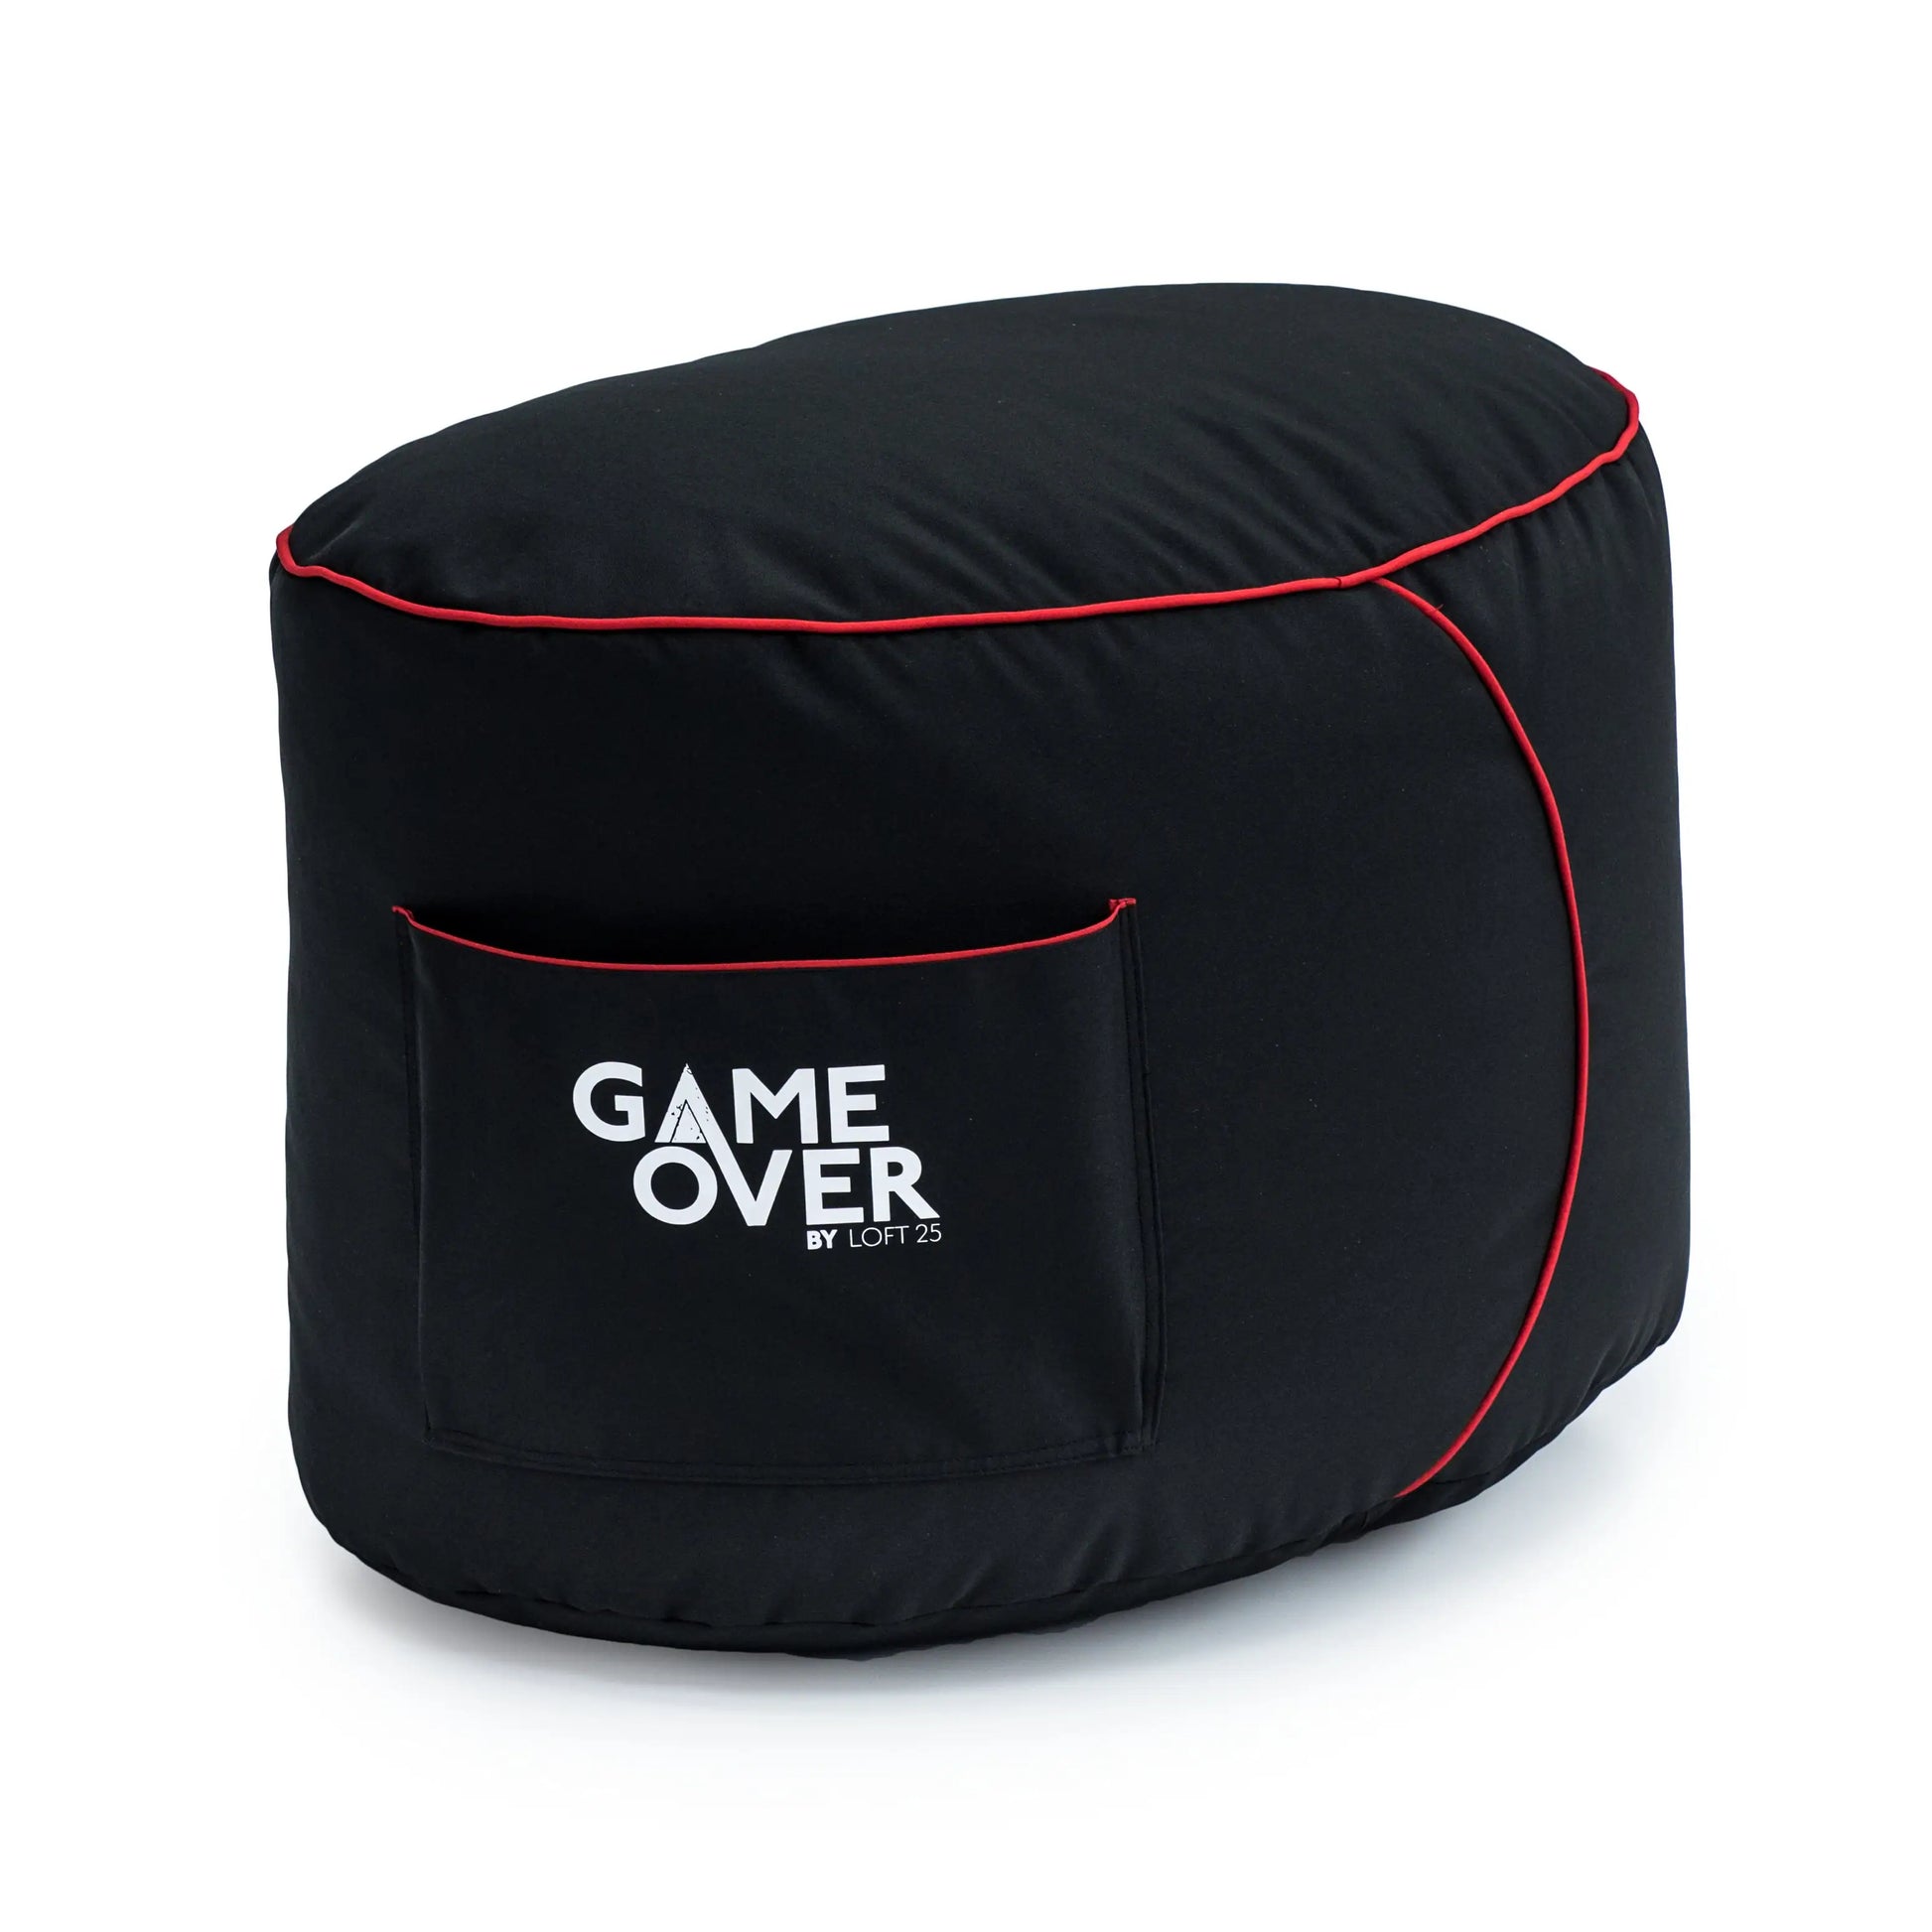 Black bean bag ottoman cover with red trim and "GAME OVER" logo